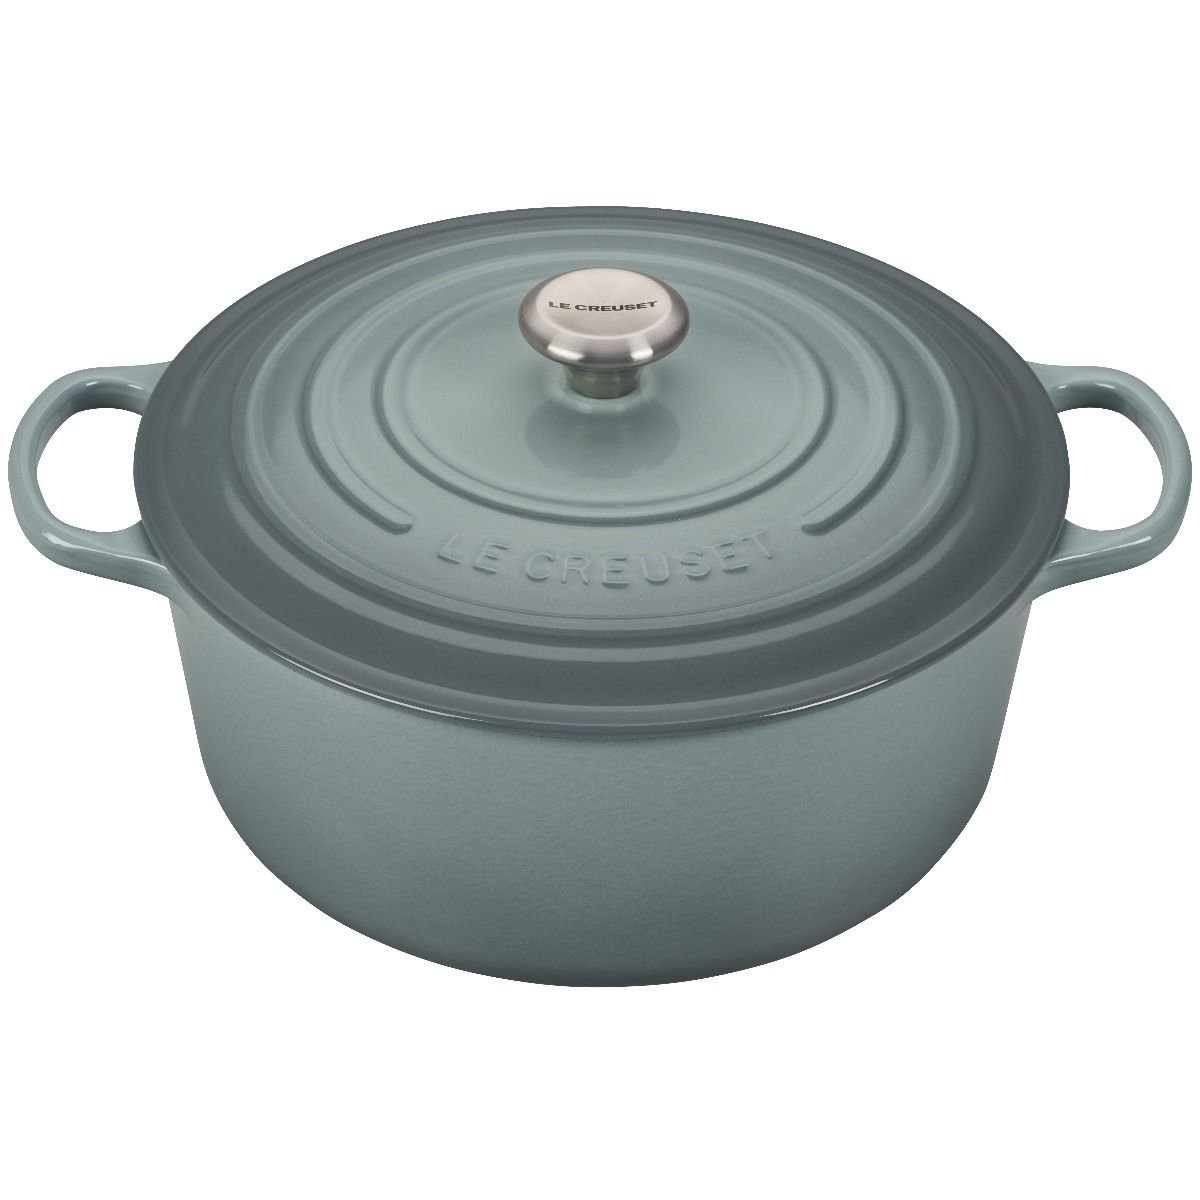  Cuisinart Cast Iron Casserole, 5.5 Qt Oval Covered, Enameled  Provencial Blue: Dutch Oven: Home & Kitchen